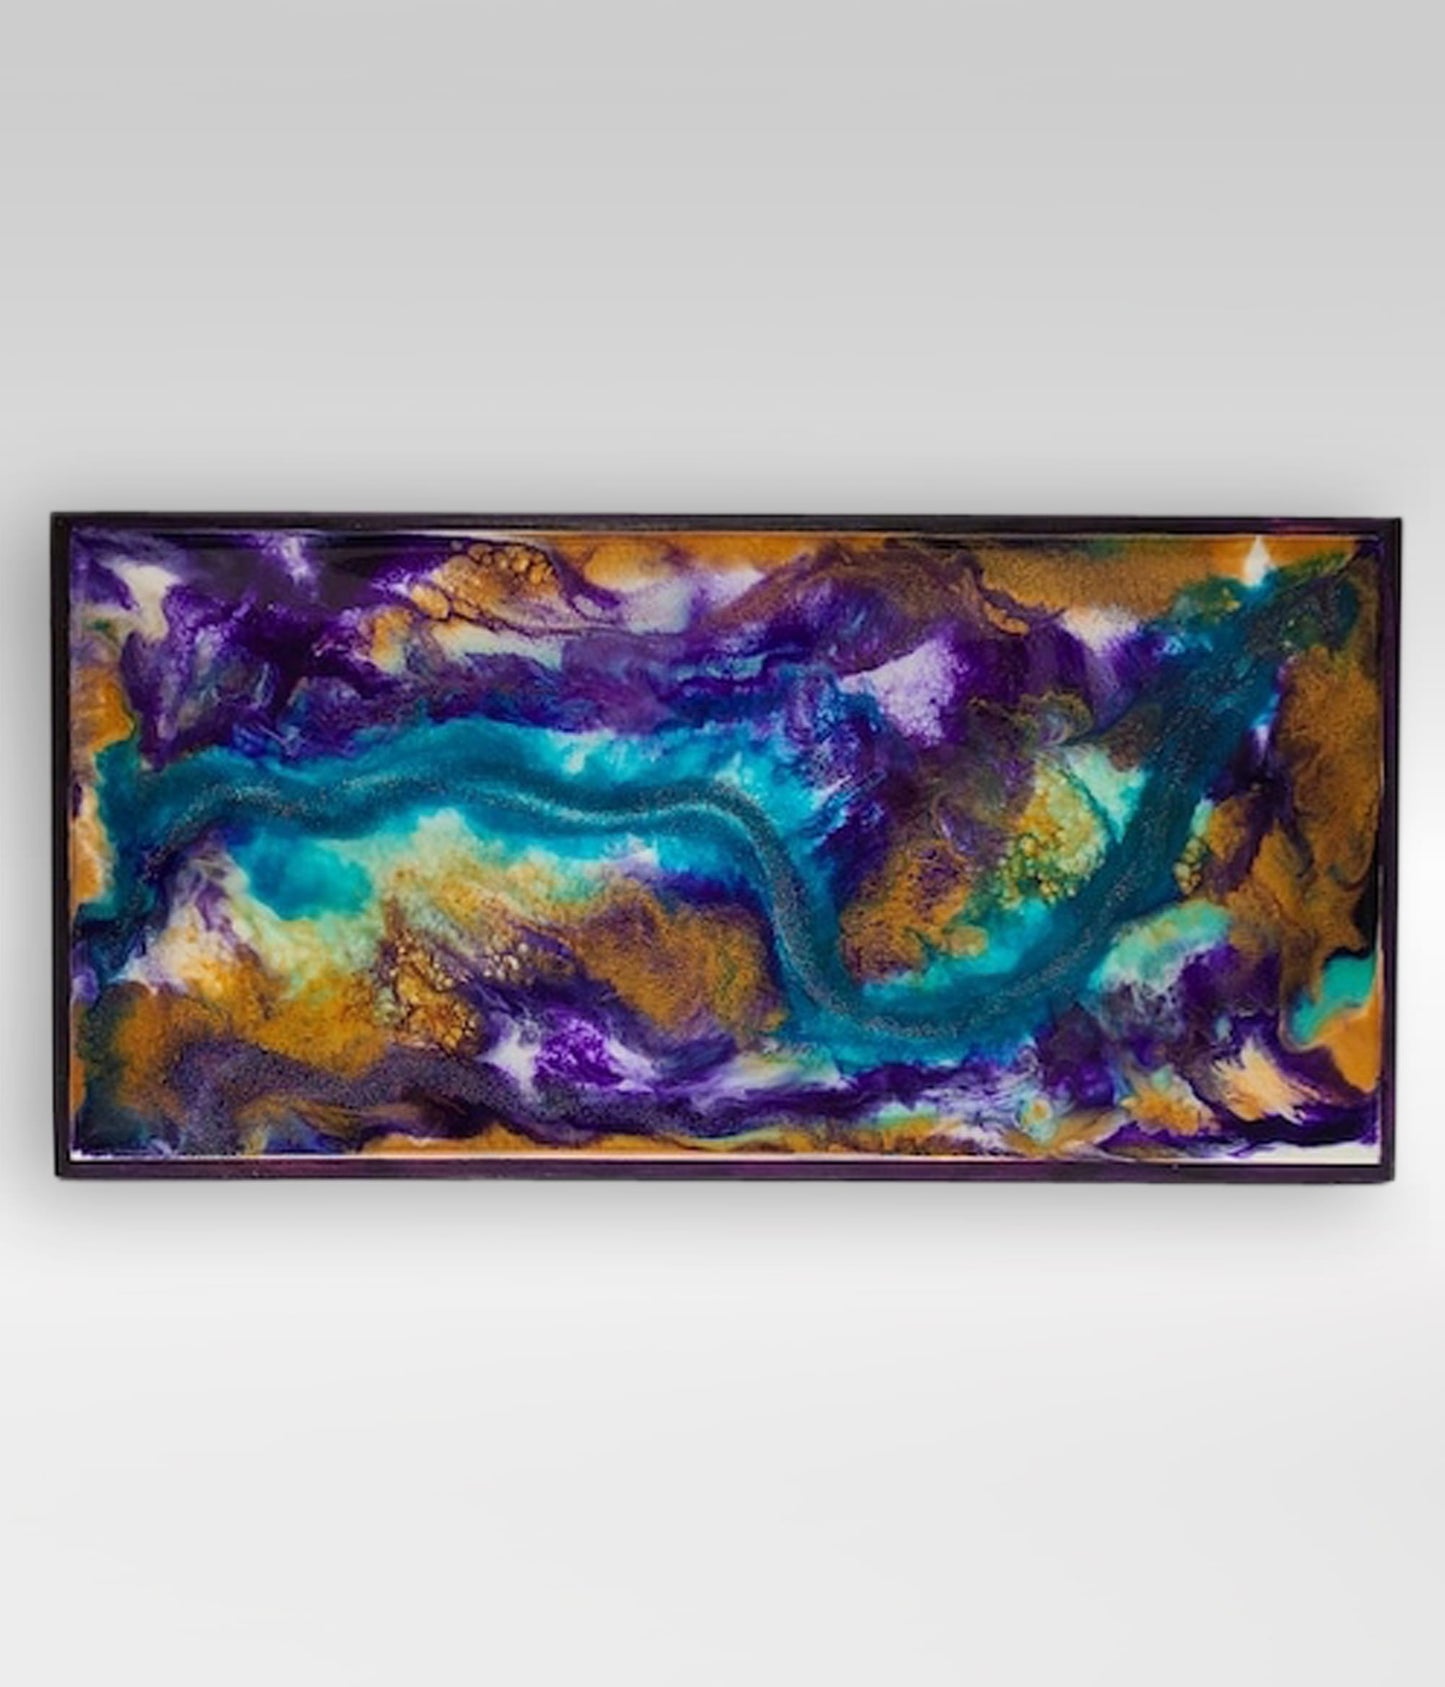 Party Time – 10 x 20 Resin Painting On Wood